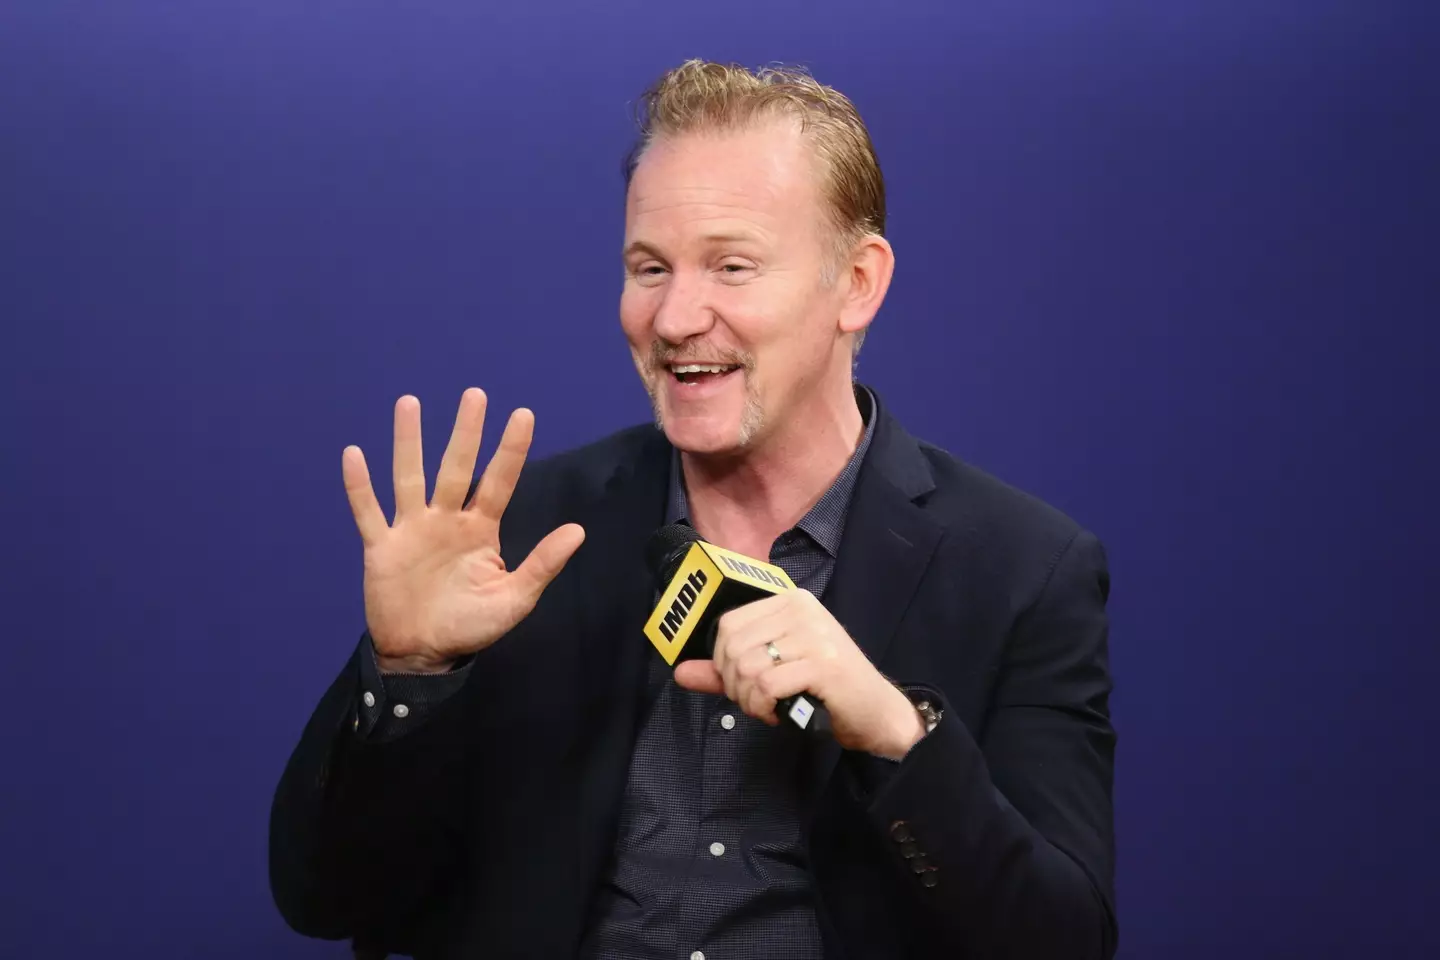 Morgan Spurlock had been diagnosed with cancer. (Rich Polk/Getty Images for IMDb)